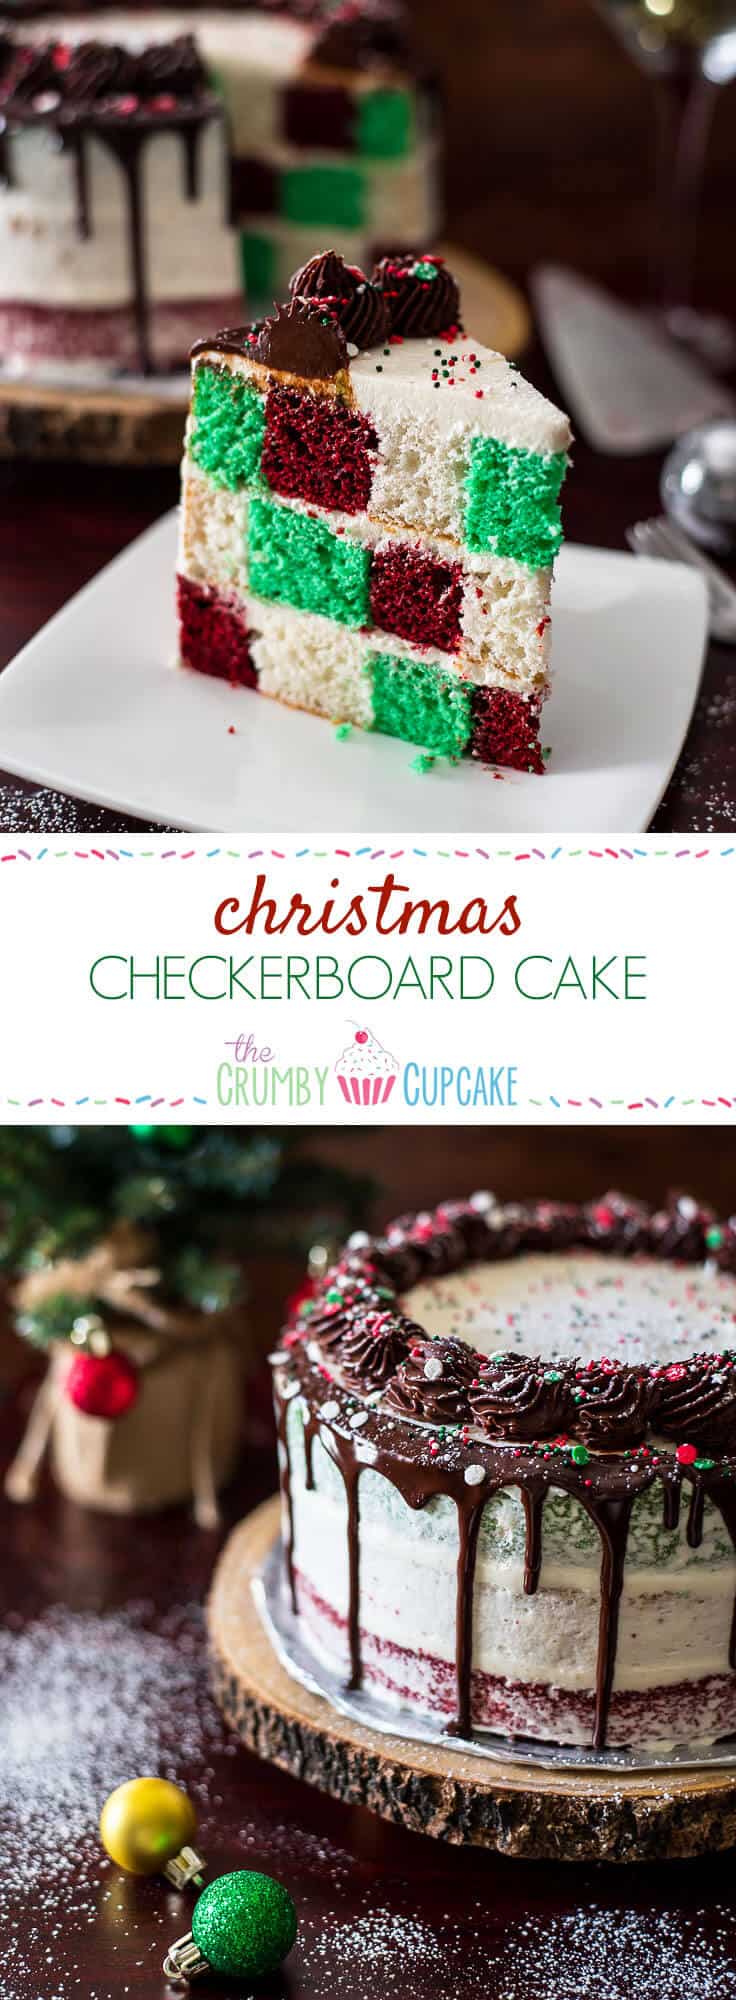 Cake deserves its time to shine on your holiday table, and this Christmas Checkerboard Cake is just the thing that's going to put all the cookies and pies to shame! Three festive colors, two types of icing, and a bunch of sprinkles make this baby the star of the show!